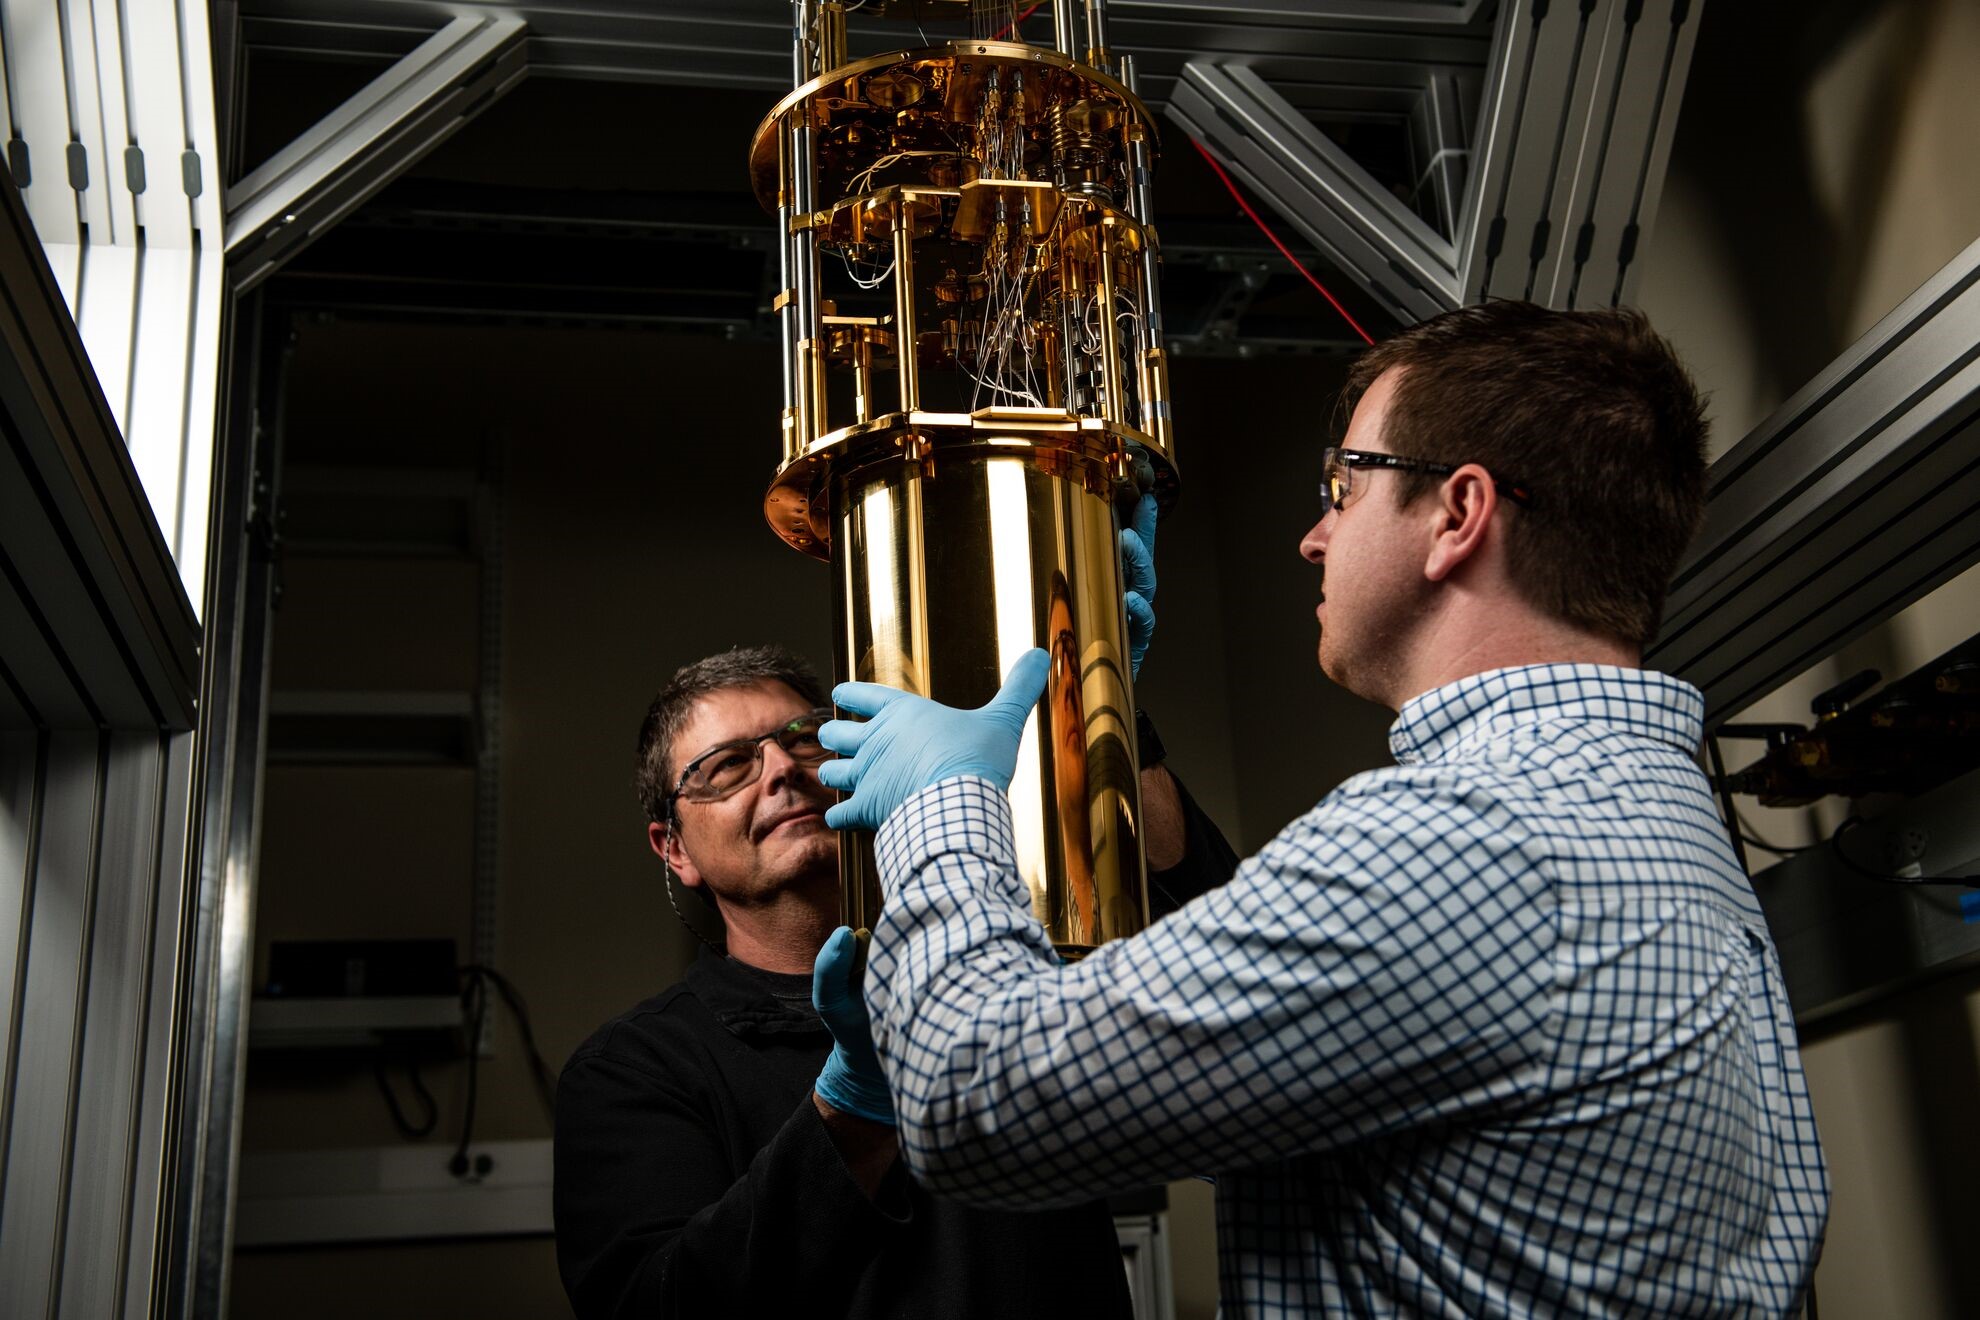 PNNL’s dilution refrigerator is capable of cooling samples to almost absolute zero on the Kelvin scale—about minus 459 degrees Fahrenheit. Researchers are testing various materials to see how they change at various temperatures. Photo by Andrea Starr.